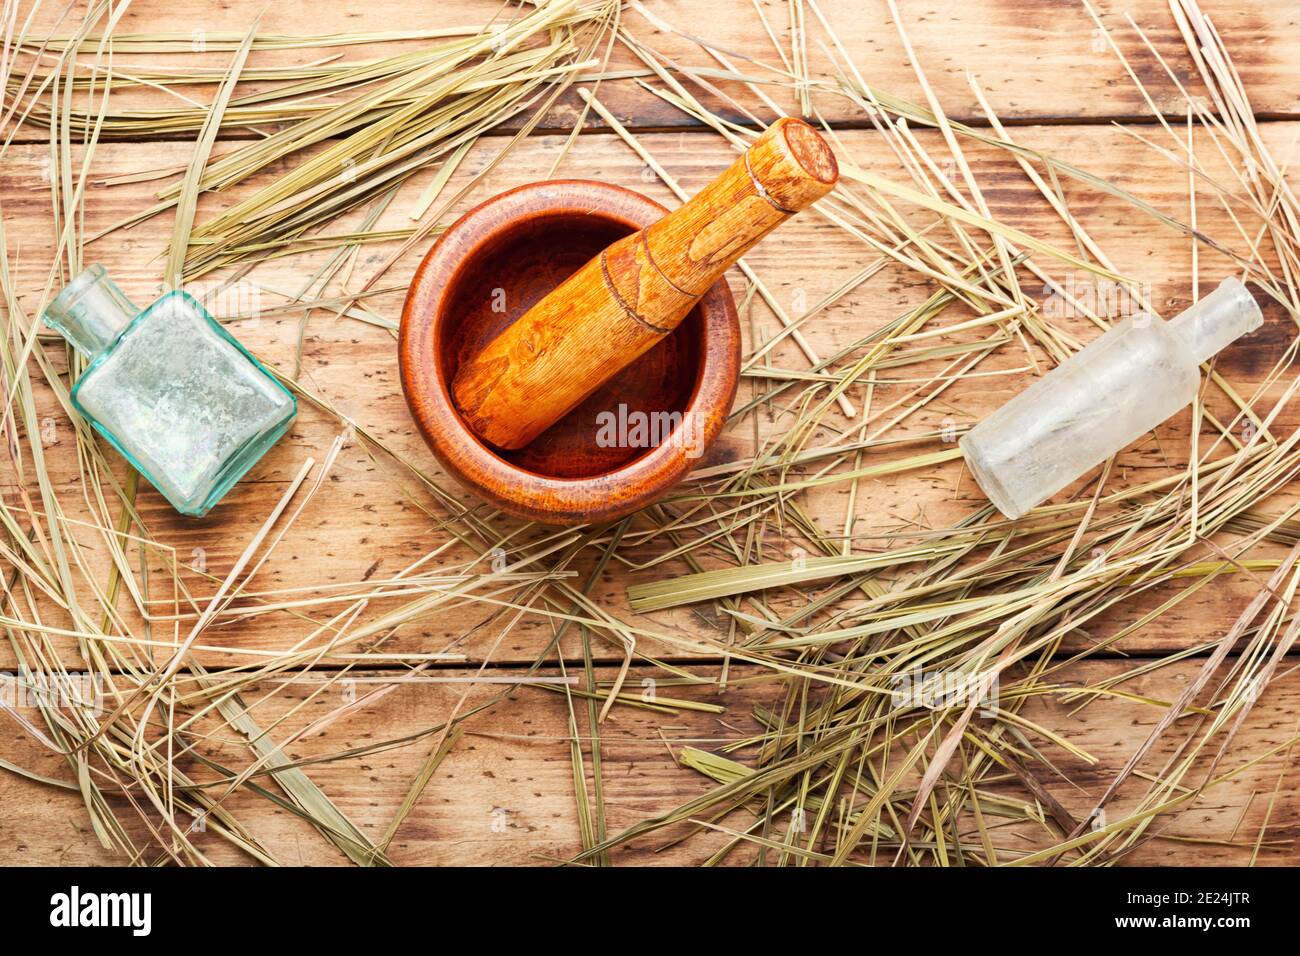 Mortar with medicinal herb sweetgrass or holy grass.Herbal medicine.Herbalism Stock Photo